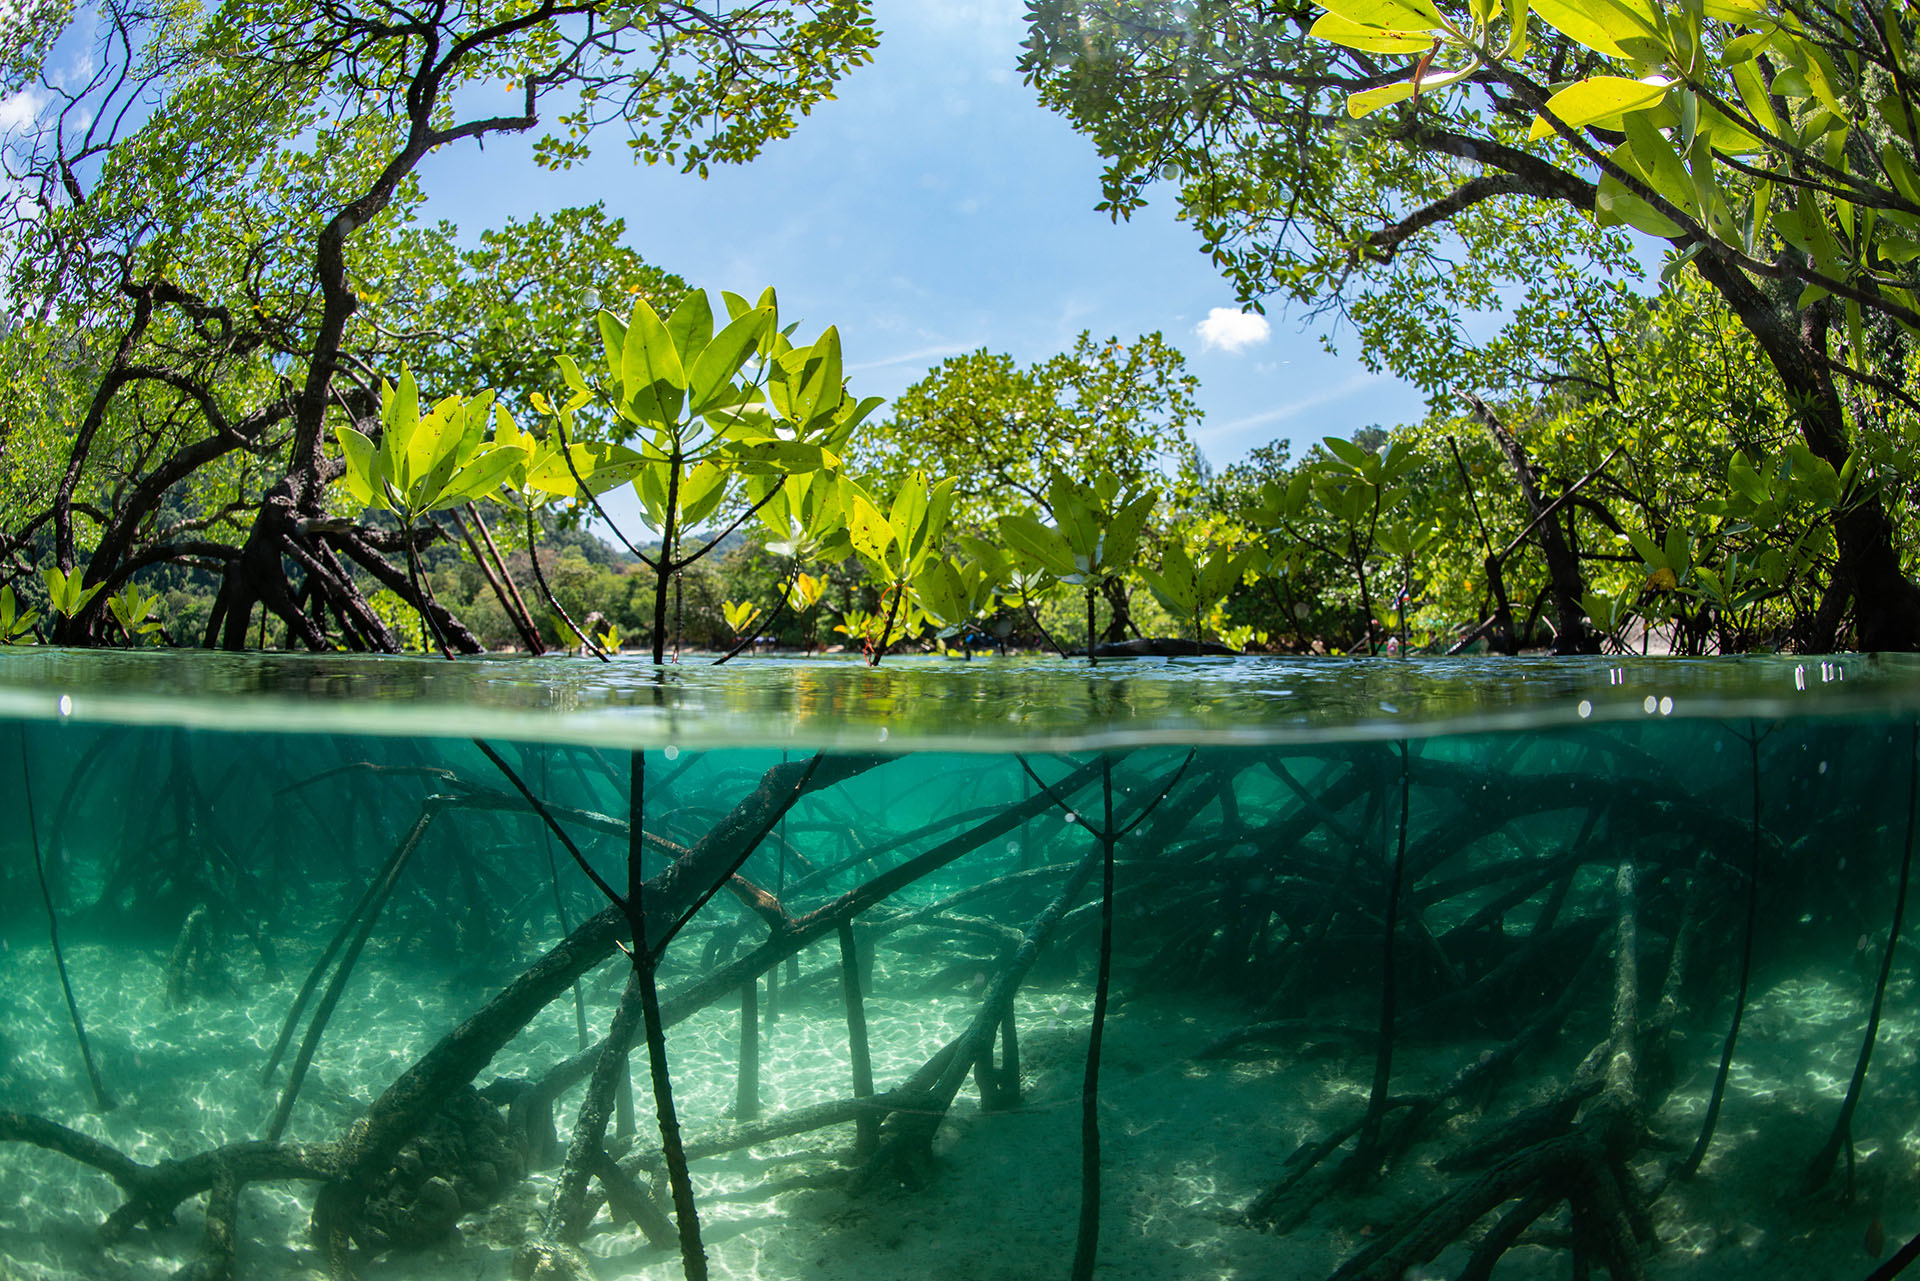 Image of mangrove swamp from surface level